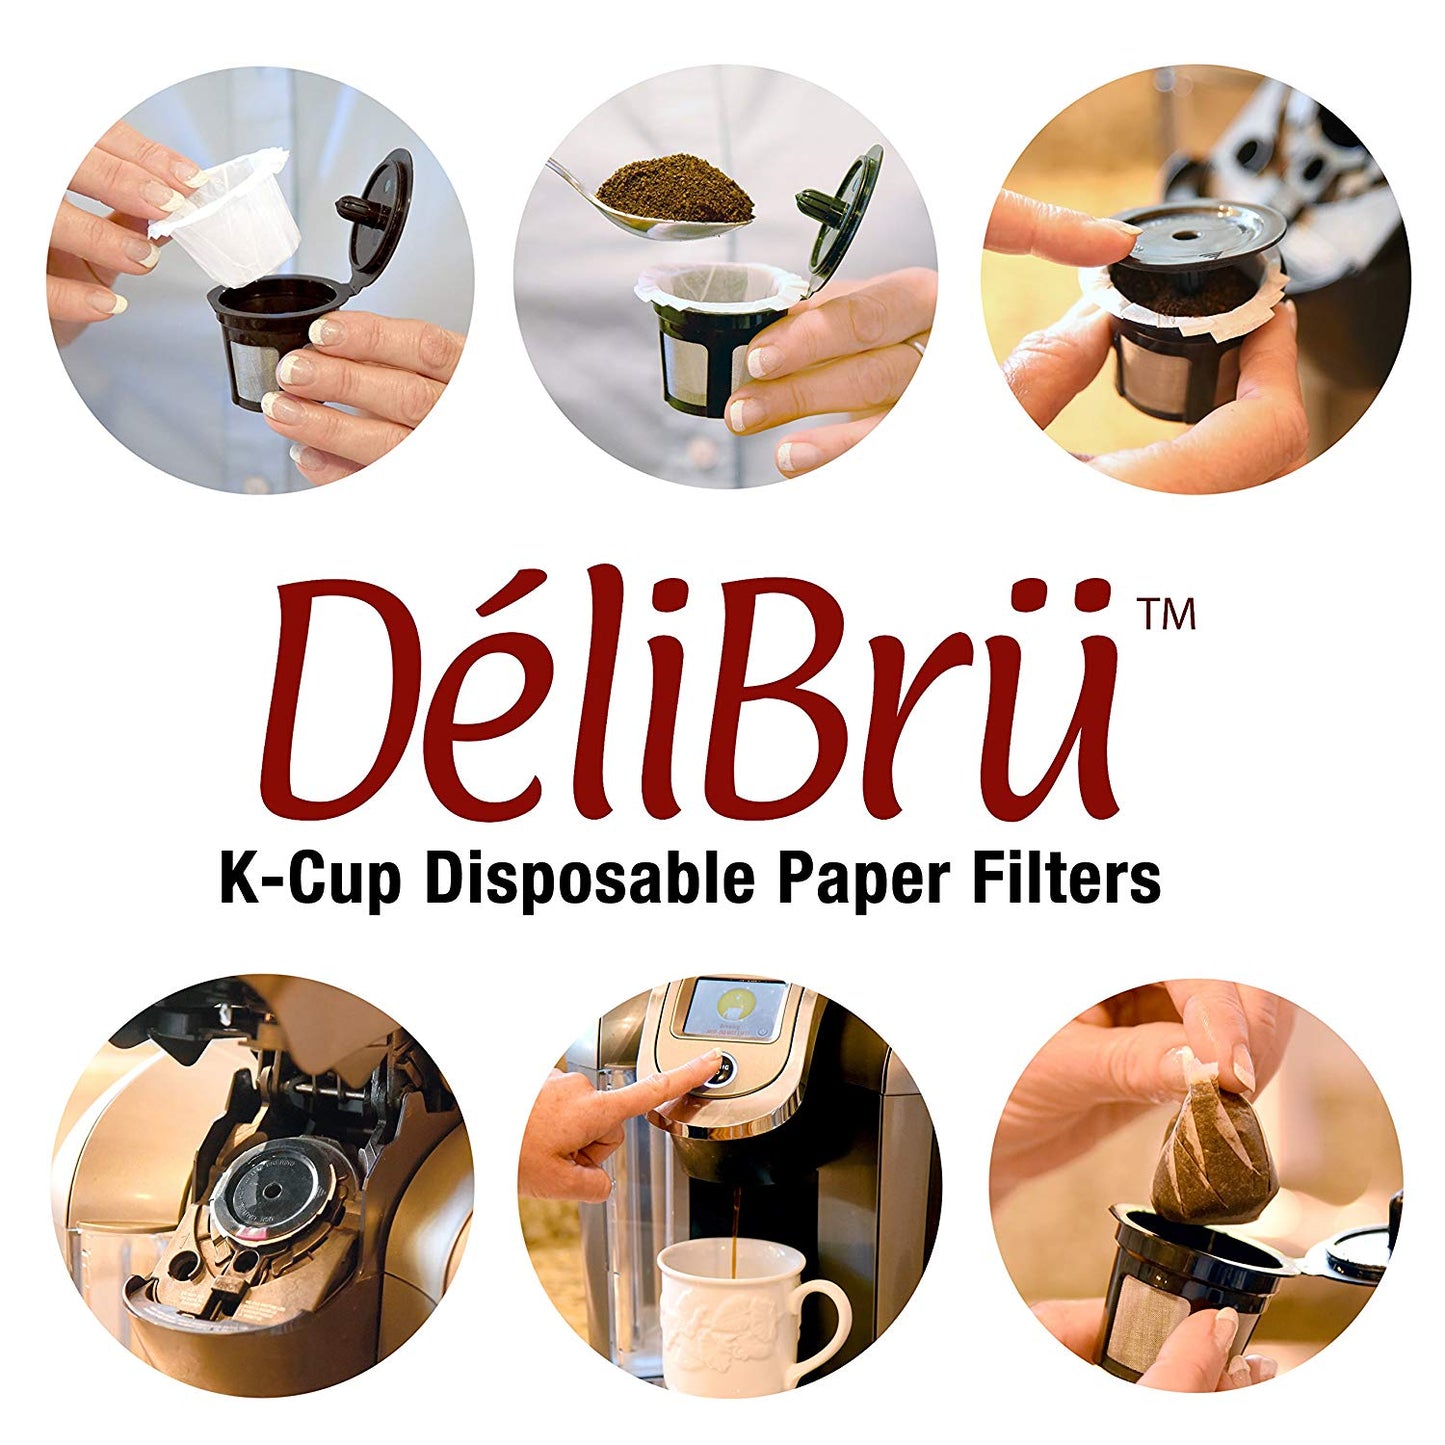 Optional Disposable Paper Filters for Reusable K Cups (100/Box) Fits All Brands